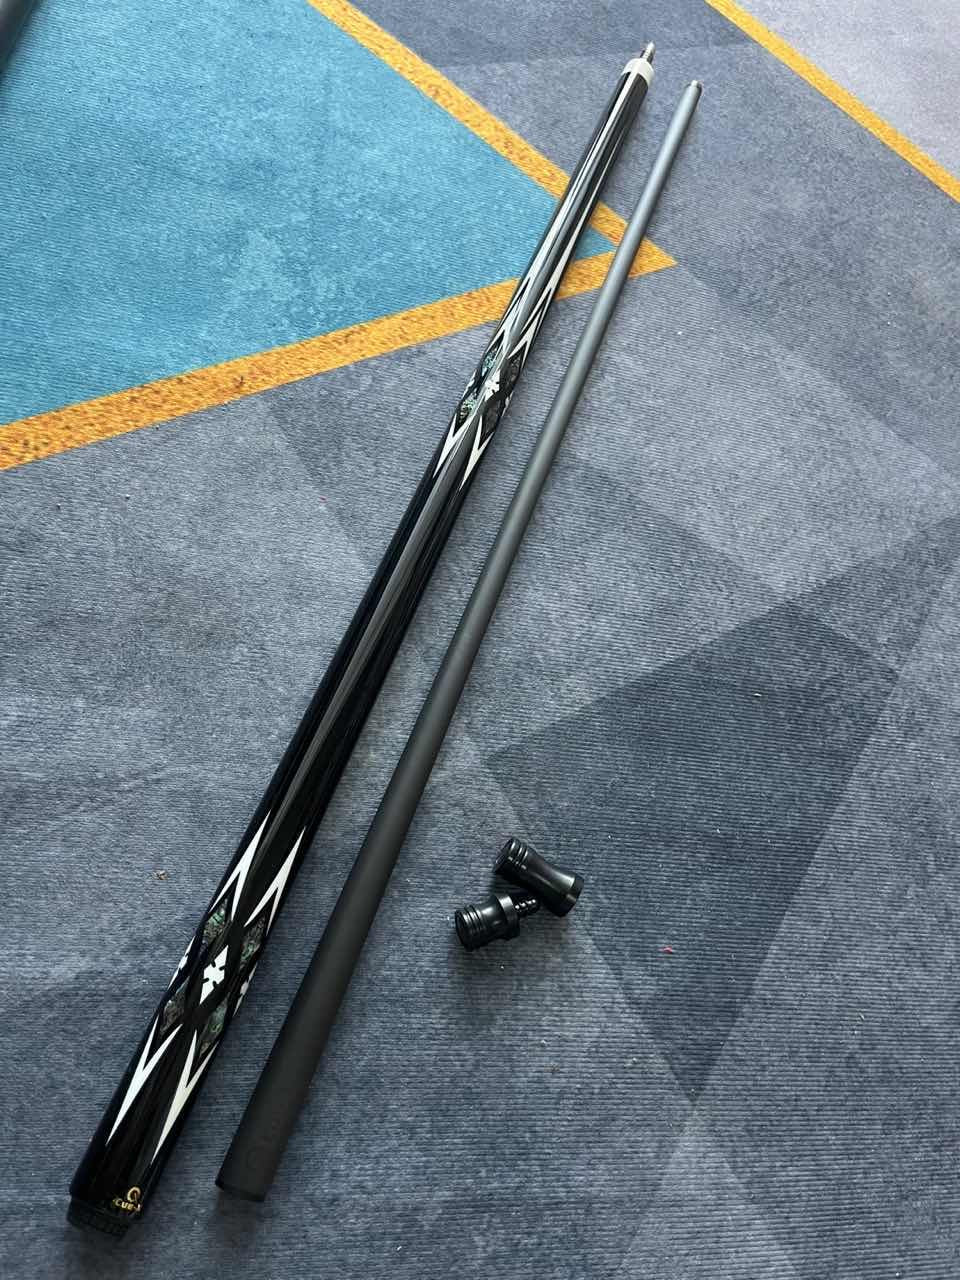 CUE-X Carbon Fiber Abalone Shell Inlay Pool Cue Stick Wrapless Black Technology Low Deflection Billiard,12.5mm,147cm,HQ-11F